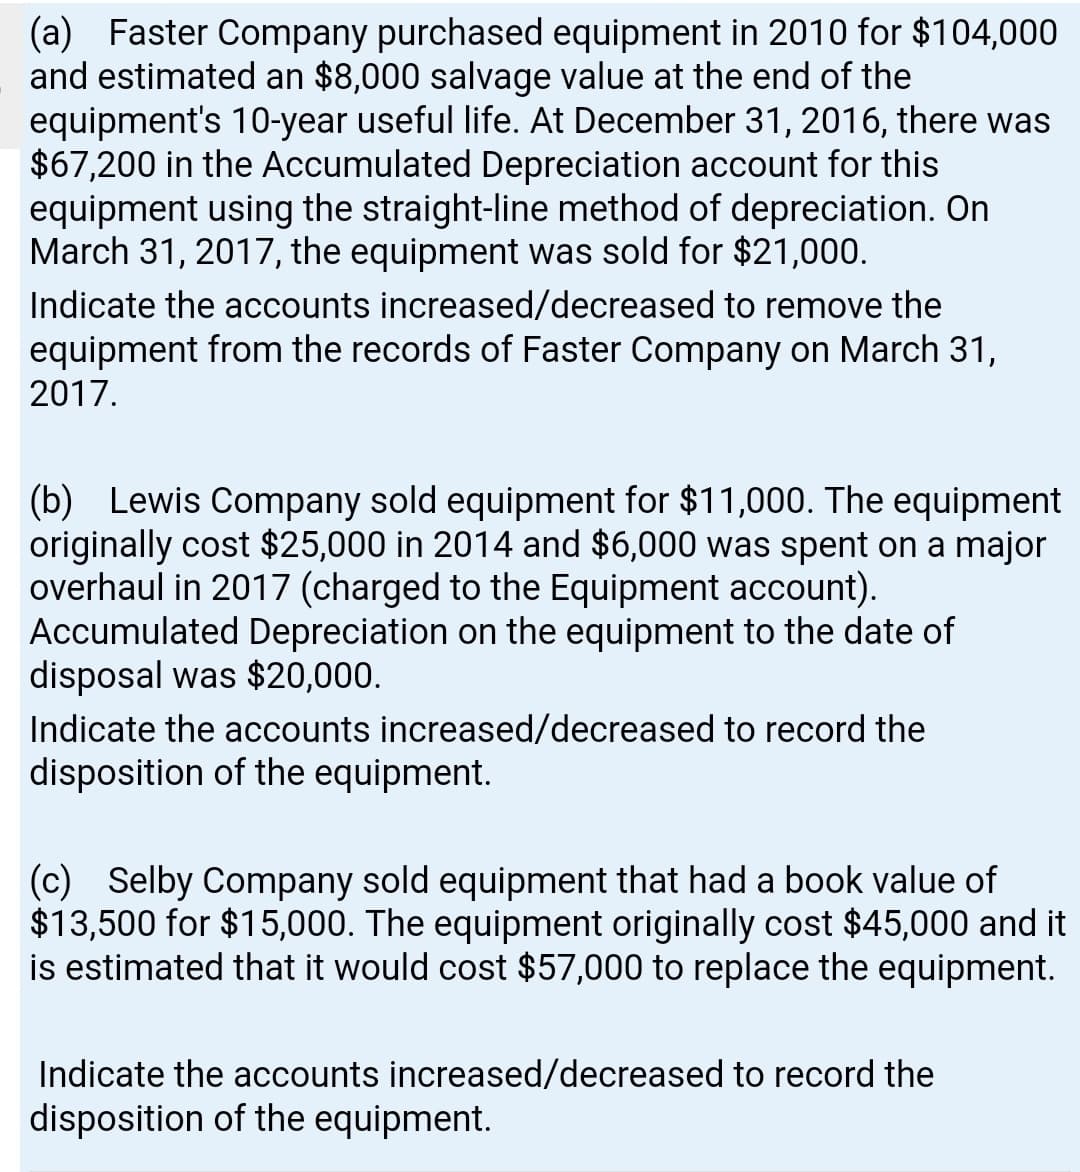 (a) Faster Company purchased equipment in 2010 for $104,000
and estimated an $8,000 salvage value at the end of the
equipment's 10-year useful life. At December 31, 2016, there was
$67,200 in the Accumulated Depreciation account for this
equipment using the straight-line method of depreciation. On
March 31, 2017, the equipment was sold for $21,000.
Indicate the accounts increased/decreased to remove the
equipment from the records of Faster Company on March 31,
2017.
(b) Lewis Company sold equipment for $11,000. The equipment
originally cost $25,000 in 2014 and $6,000 was spent on a major
overhaul in 2017 (charged to the Equipment account).
Accumulated Depreciation on the equipment to the date of
disposal was $20,000.
Indicate the accounts increased/decreased to record the
disposition of the equipment.
(c) Selby Company sold equipment that had a book value of
$13,500 for $15,000. The equipment originally cost $45,000 and it
is estimated that it would cost $57,000 to replace the equipment.
Indicate the accounts increased/decreased to record the
disposition of the equipment.
